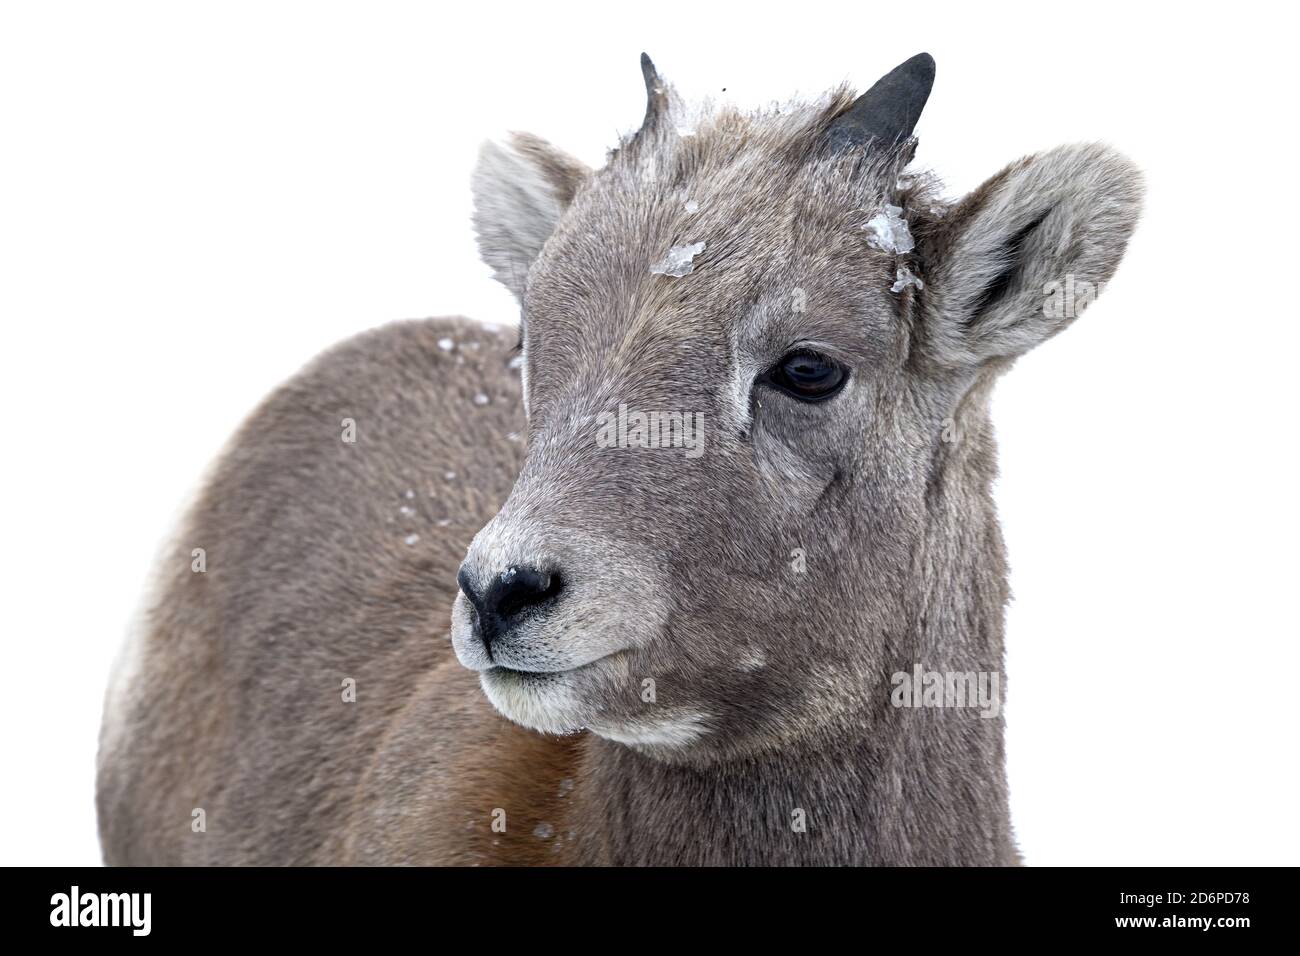 A wild animal portrait of a young Rocky Mountain Bighorn Sheep 'Ovis canadensis', on a white snow background Stock Photo